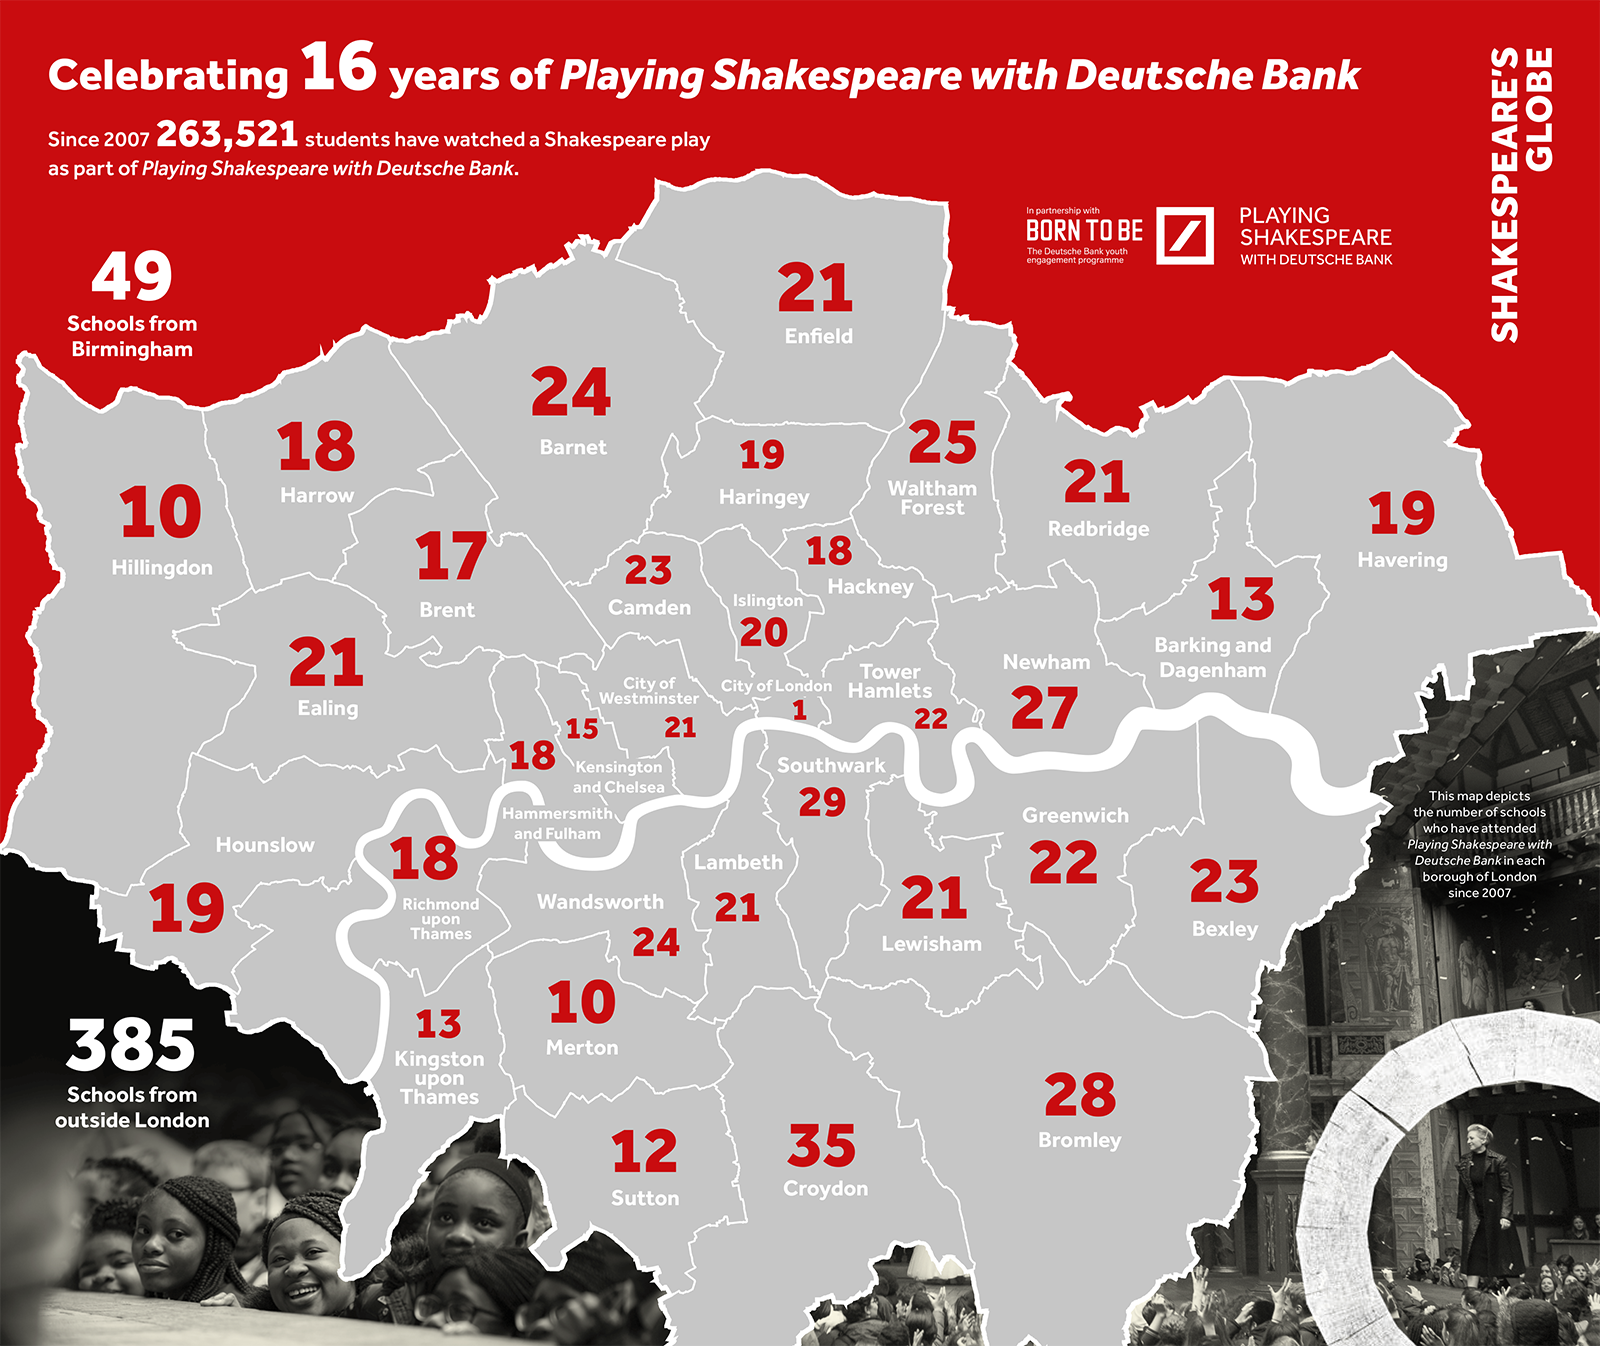 A graphical map of Greater London, dividing the Boroughs and showing the number of schools in each London Borough that have engaged with the Playing Shakespeare with Deutsche Bank project.